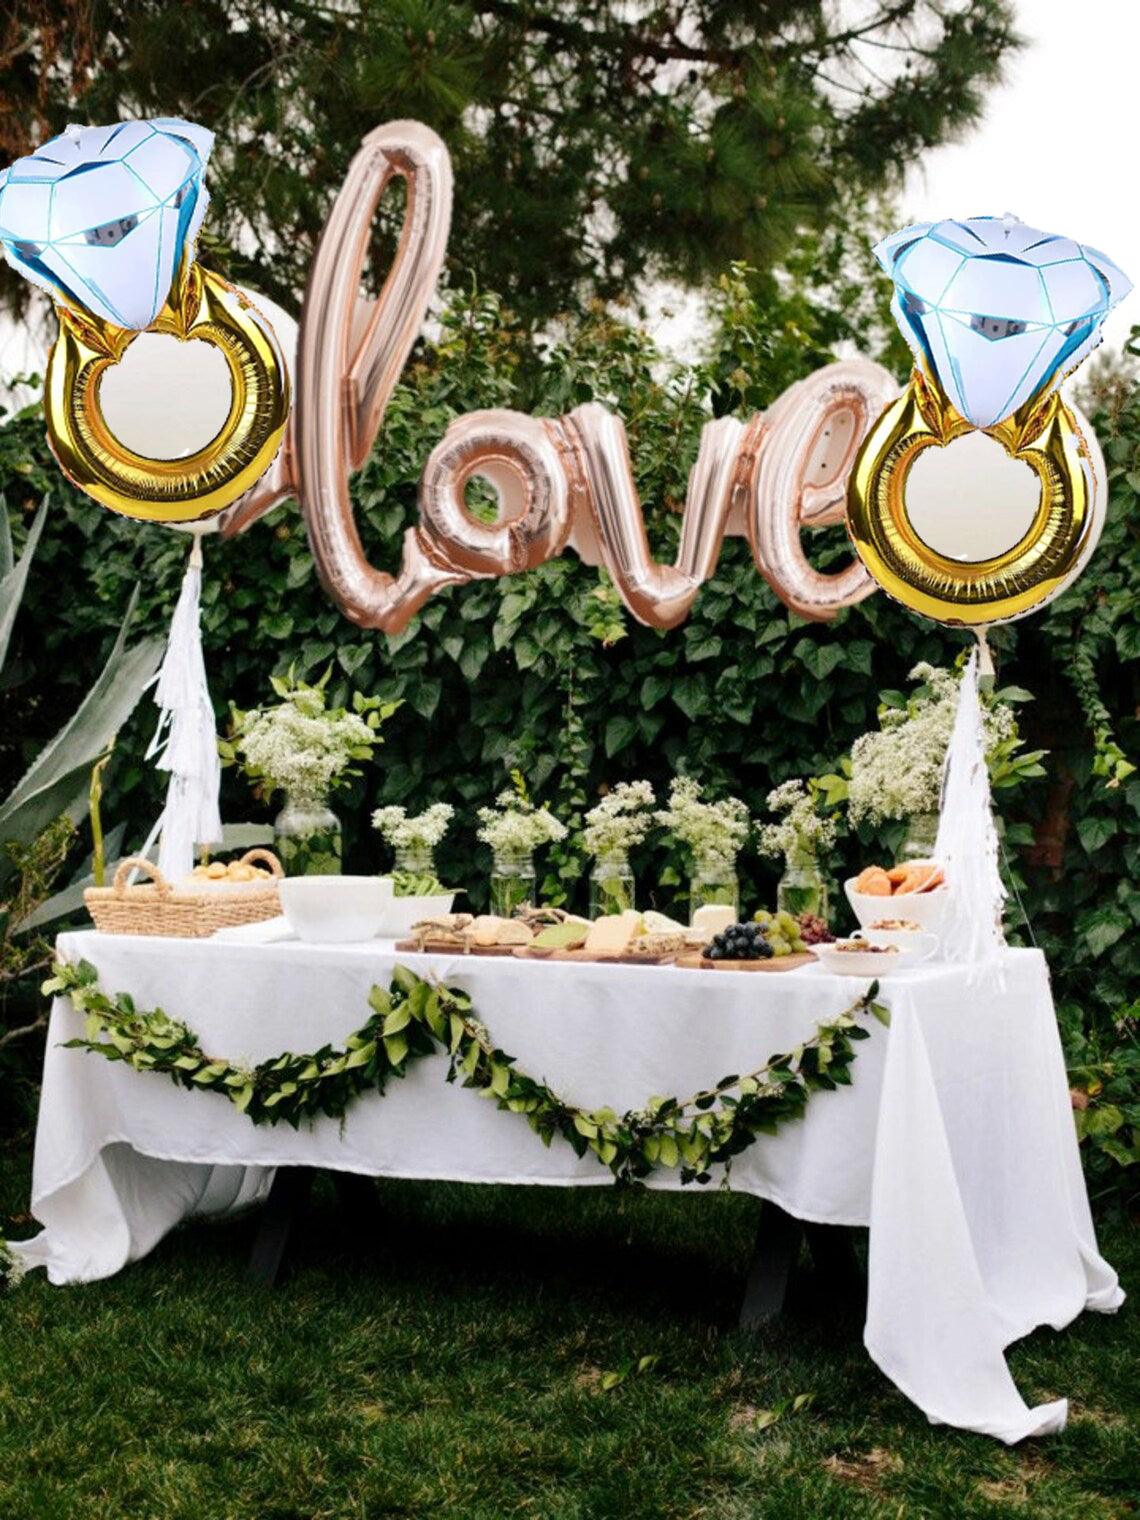 Reusable Large Rose Gold 42 Inch Mylar Foil Love Balloons & 2 Diamond Ring Balloon for Wedding Proposal Engagement Party Decorations - If you say i do